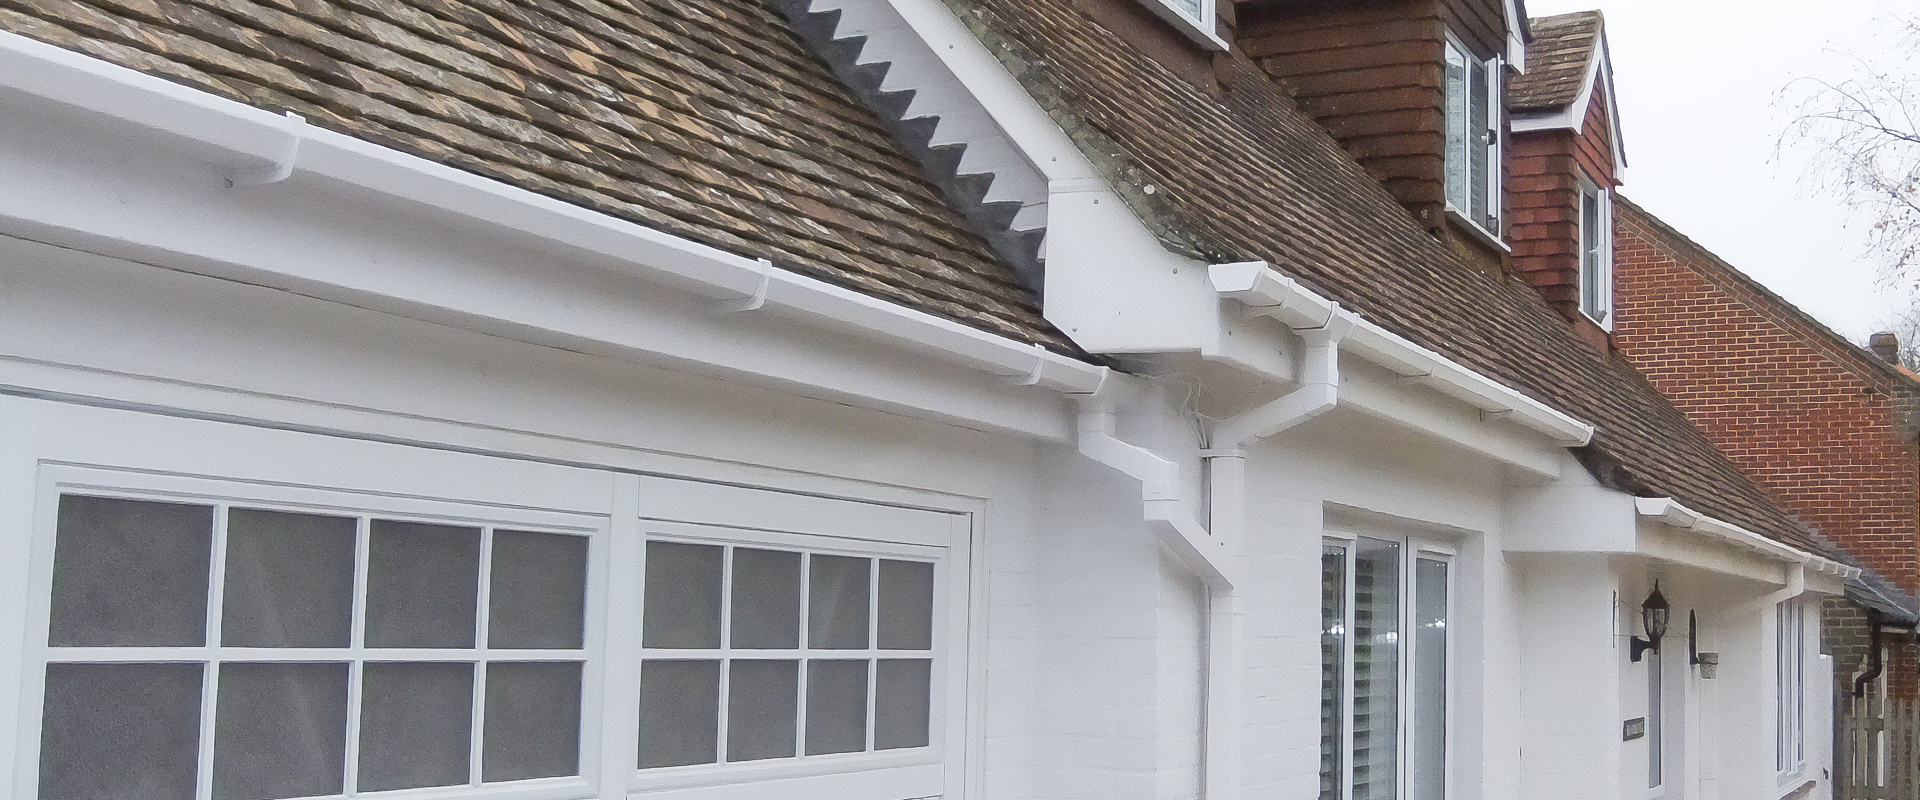 Image of Guttering & Downpipe Completed by Newbury Roofing. Domestic & Commercial Roofing Contractor.